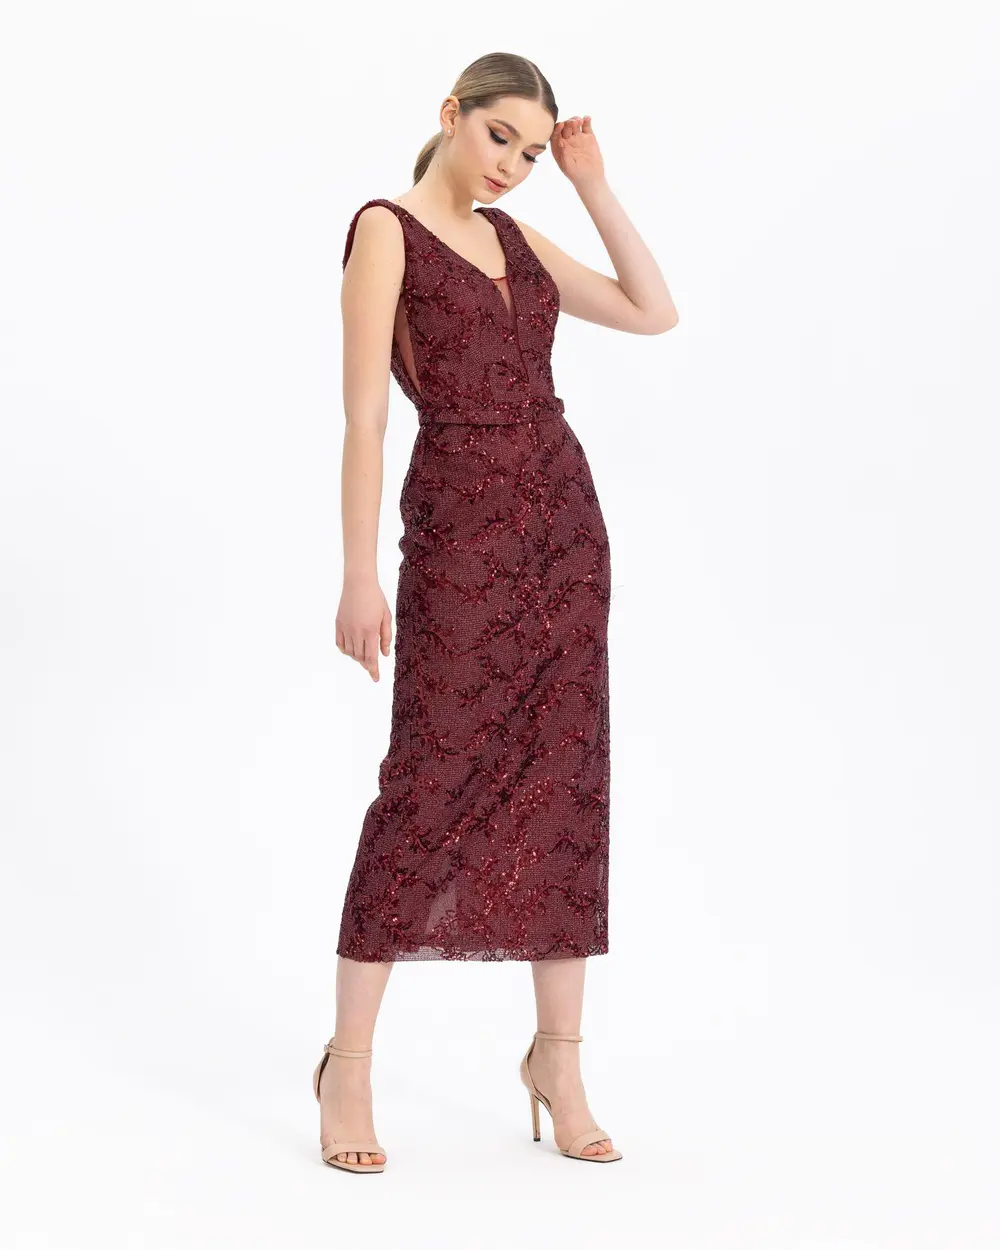 SEQUINE DETAILED PATTERNED MIDI LONG EVENING DRESS